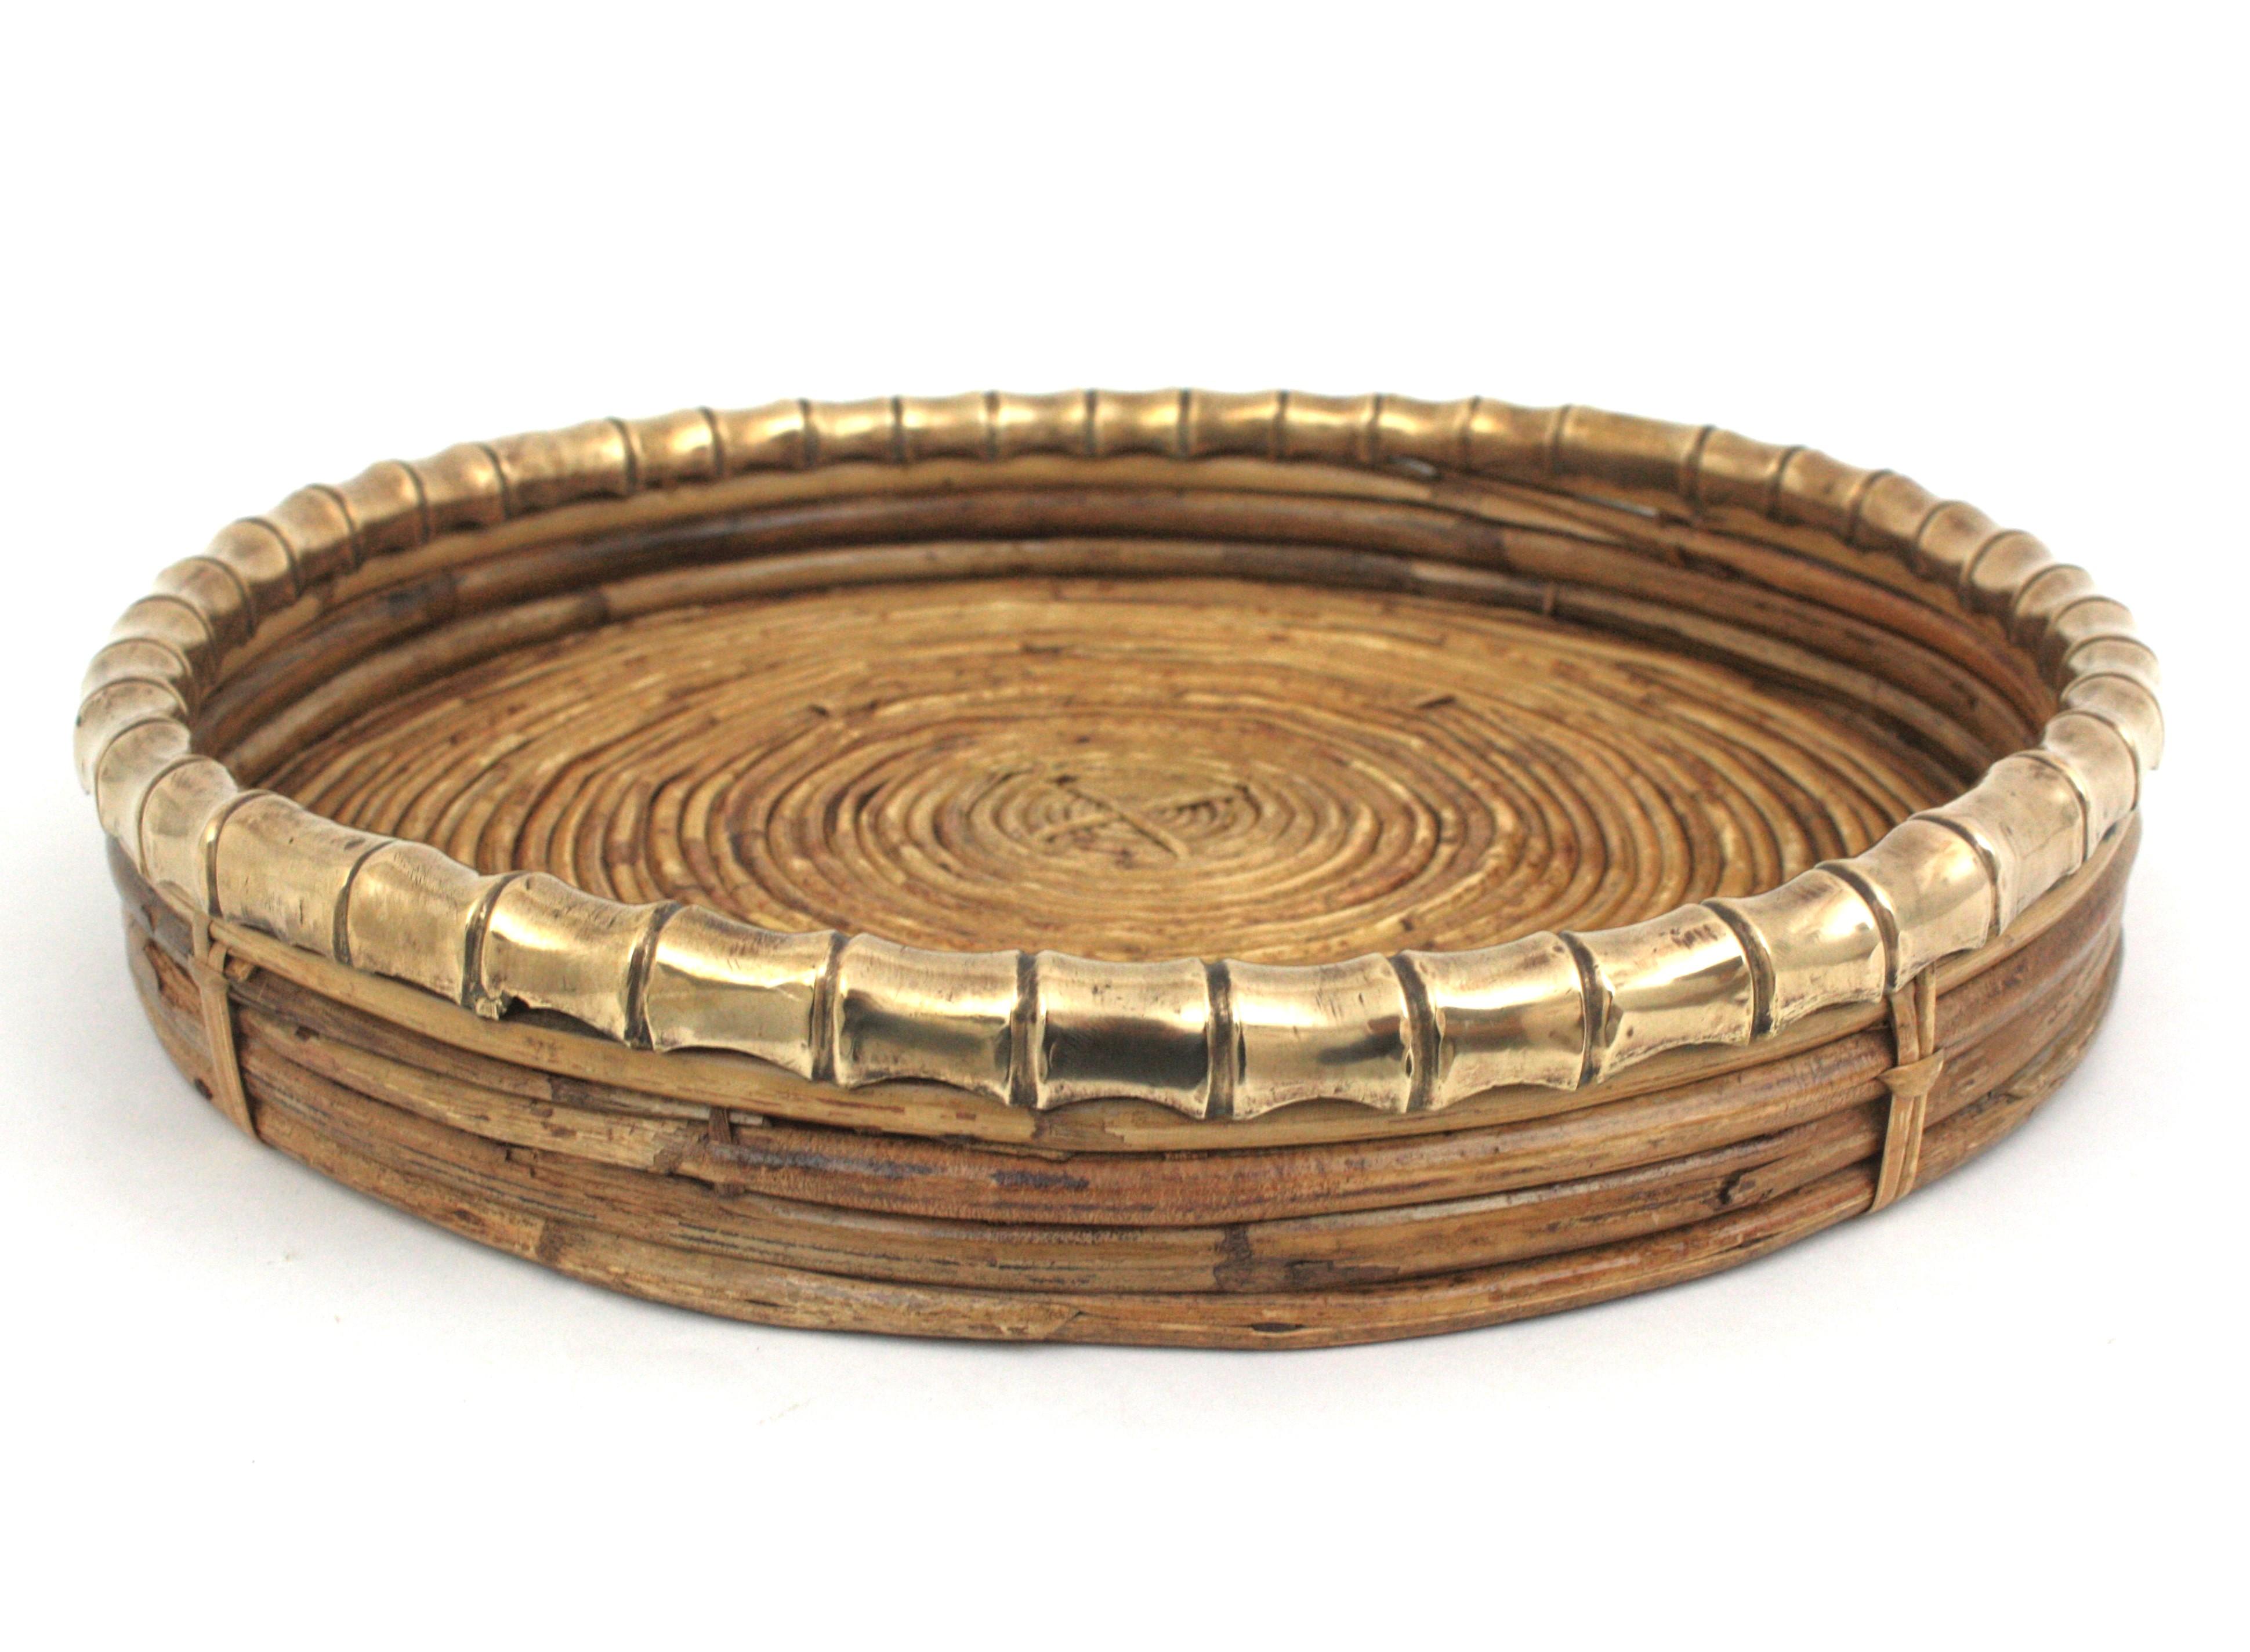 MDM Basket Centerpiece Tray in Rattan with Faux Bamboo Rim
Eye-catching Mid-Century Modern decorative rattan faux bamboo brass centerpiece / tray. Handcrafted in Italy, 1970s.
Round shape with thick faux bamboo rim in brass.
This piece is in very